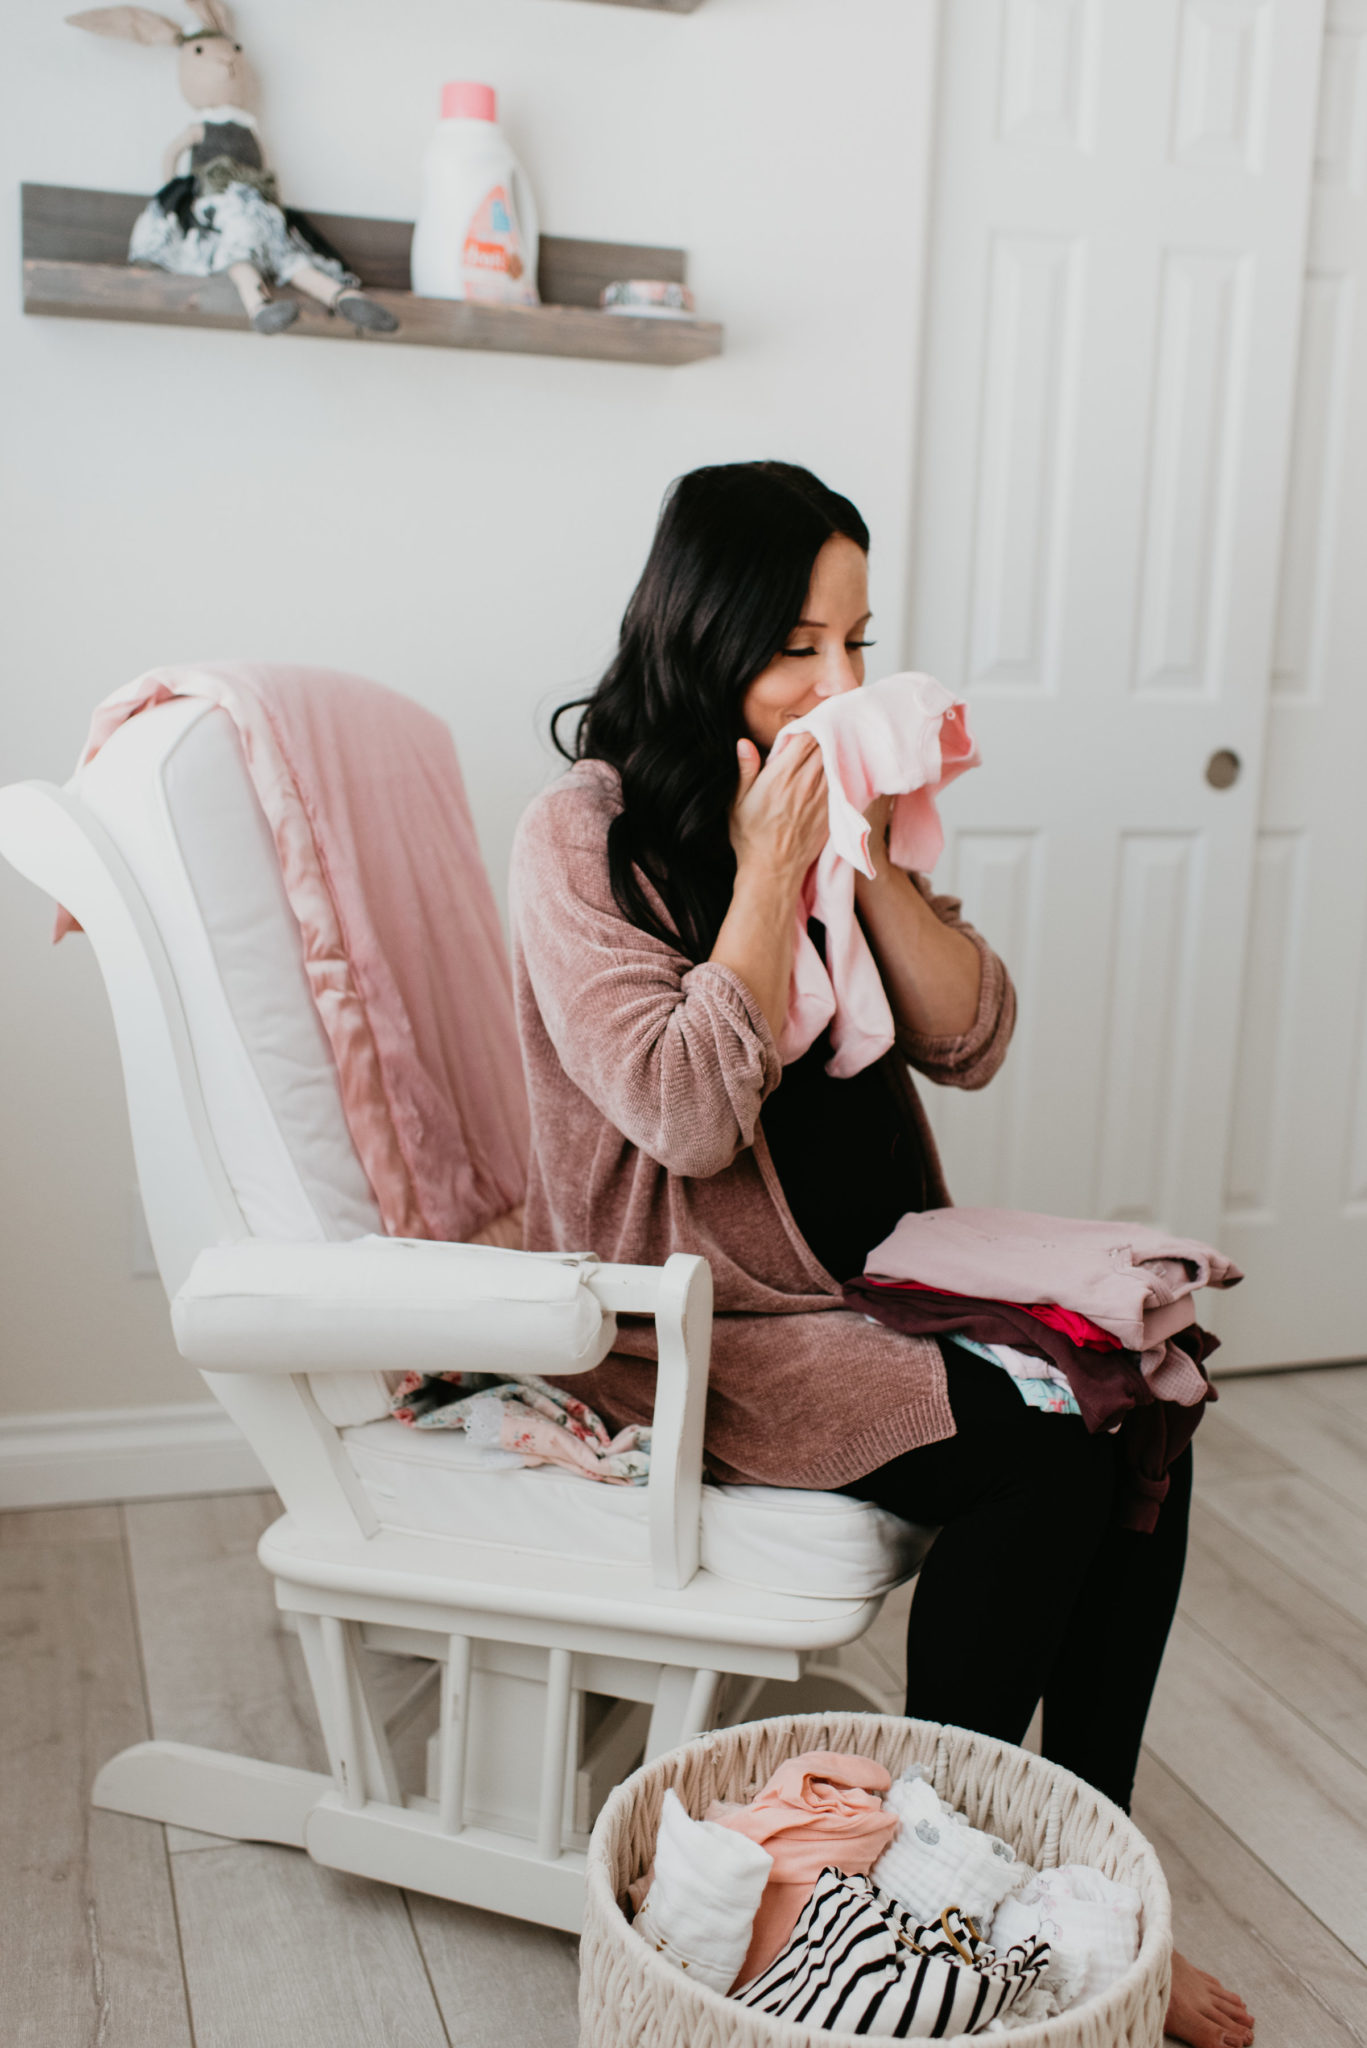 Getting Ready for Baby with Dreft Newborn by popular Las Vegas blogger, Outfits & Outings